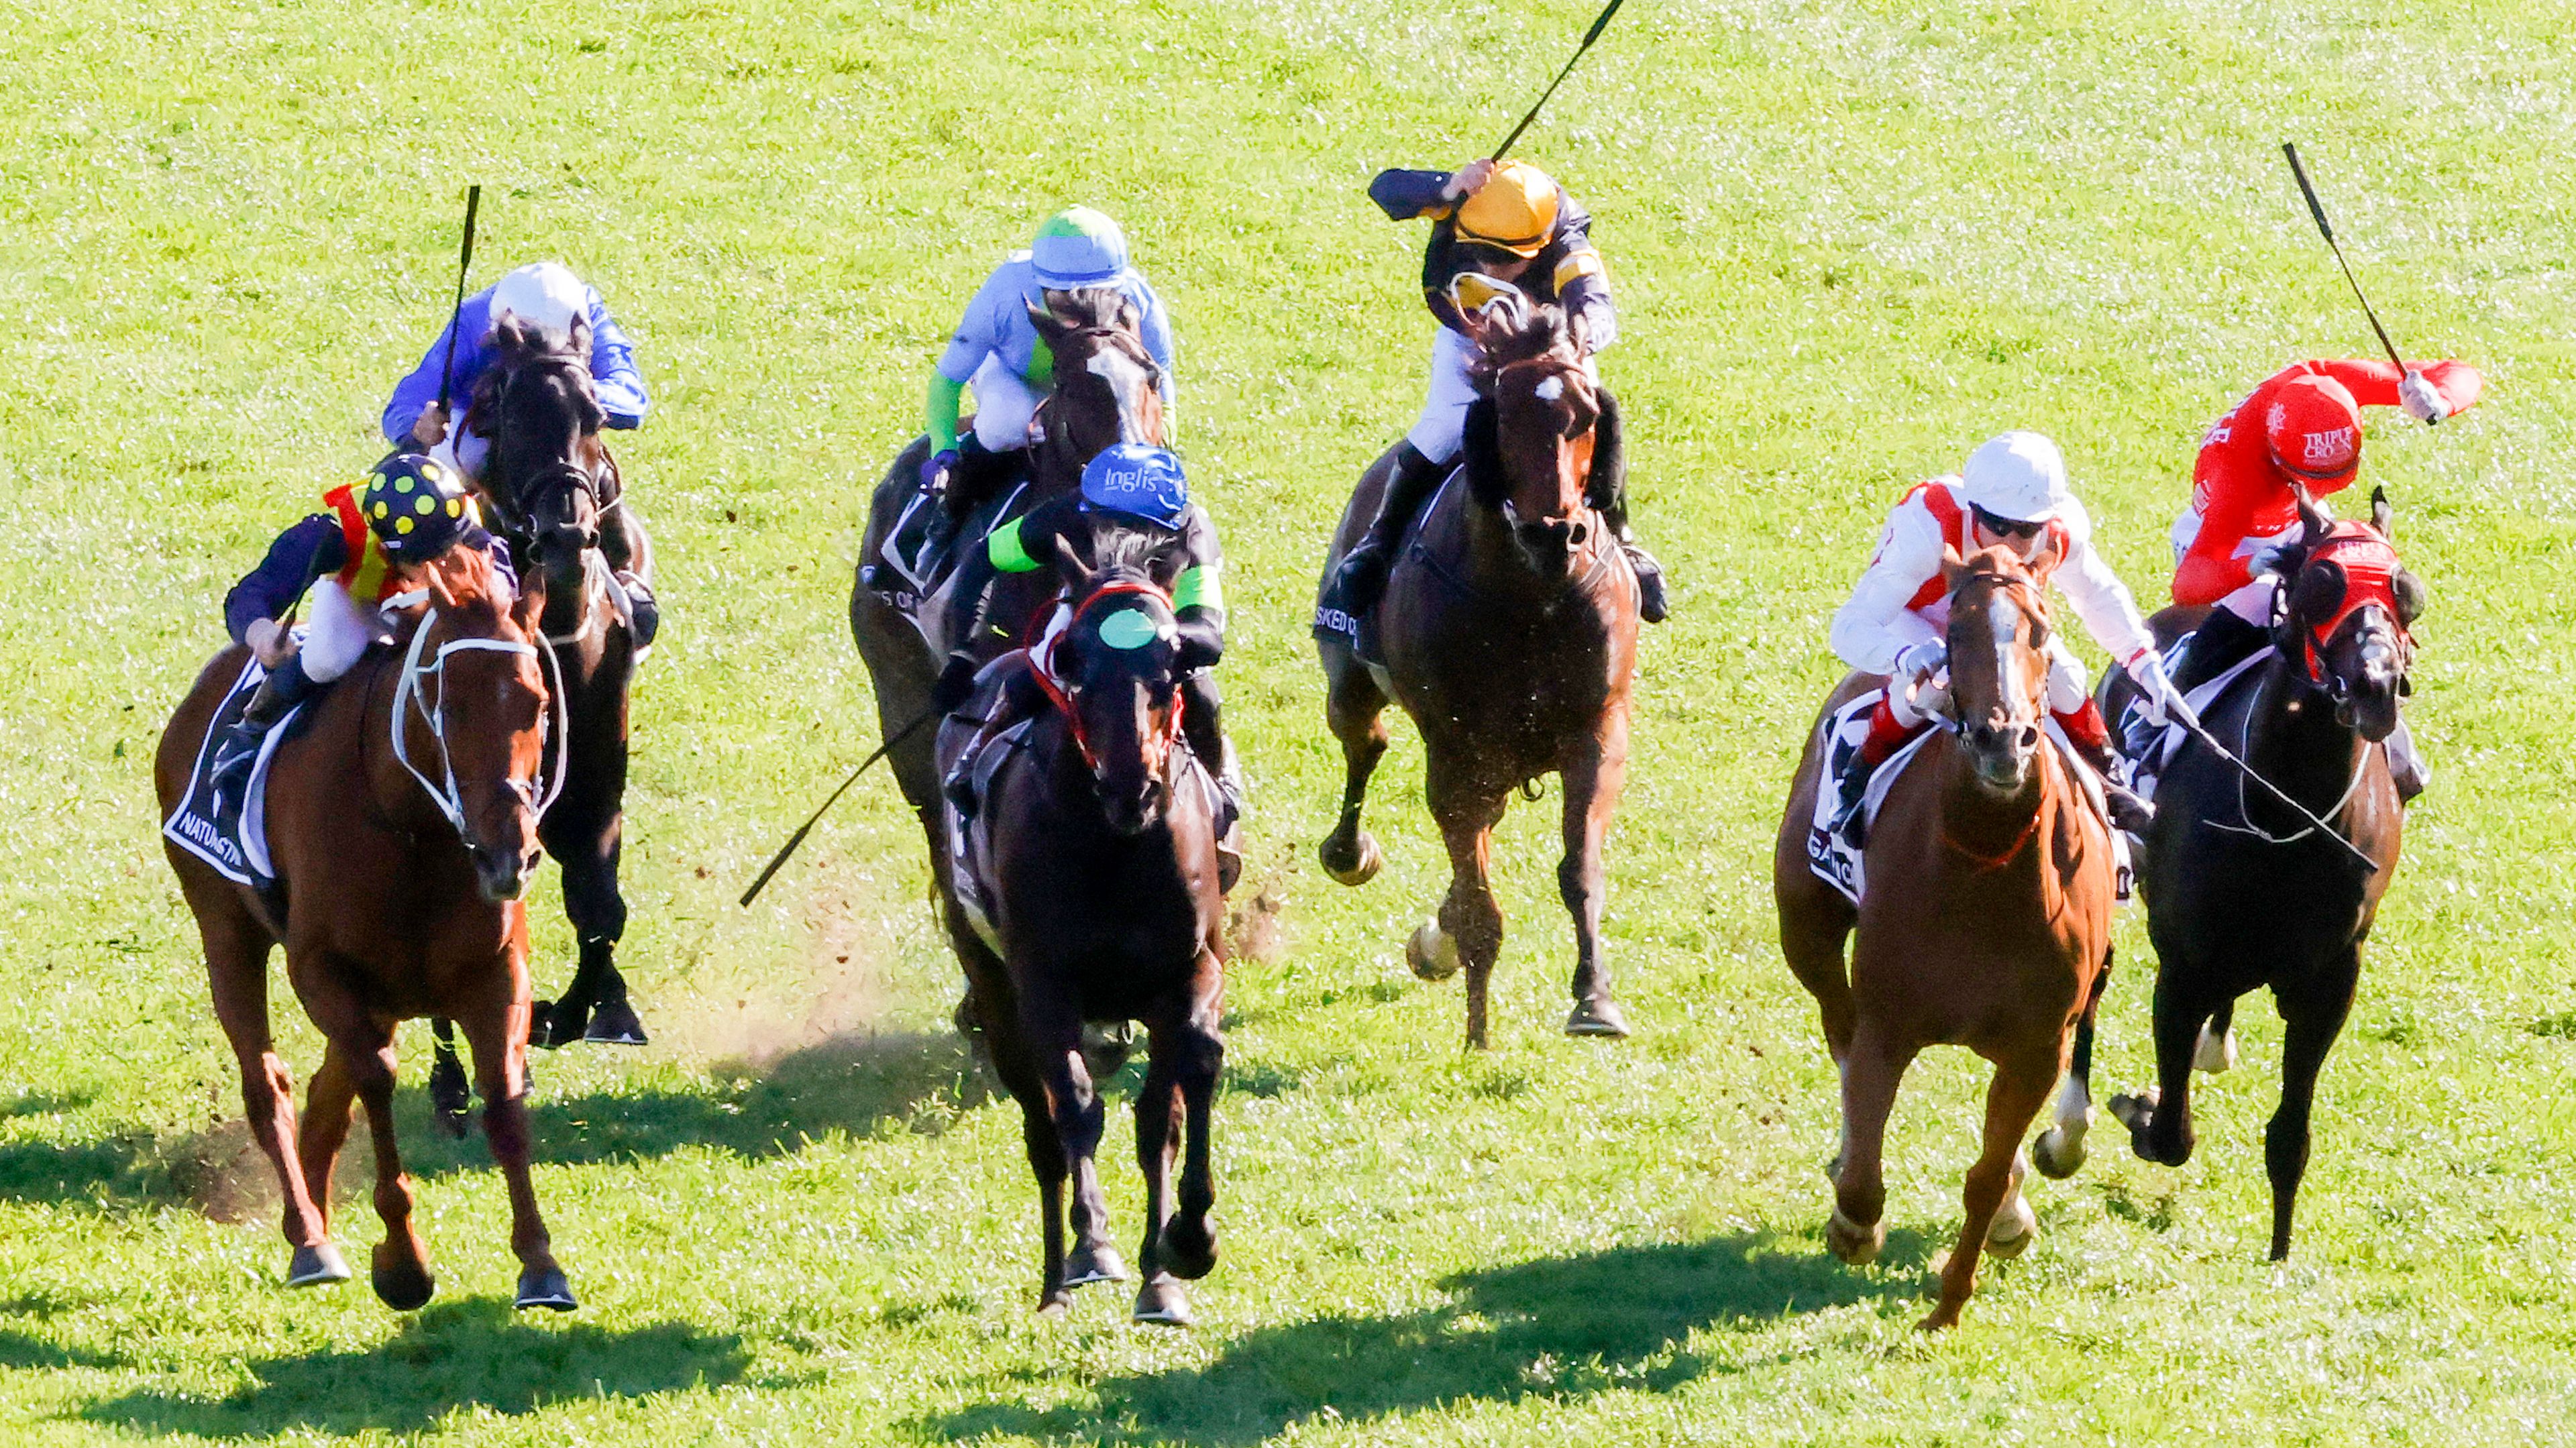 Craig Williams (red and white) on Giga Kick wins race 7 The Tab Everest during Everest Day at Royal Randwick Racecourse on October 15, 2022 in Sydney, Australia. (Photo by Jenny Evans/Getty Images)